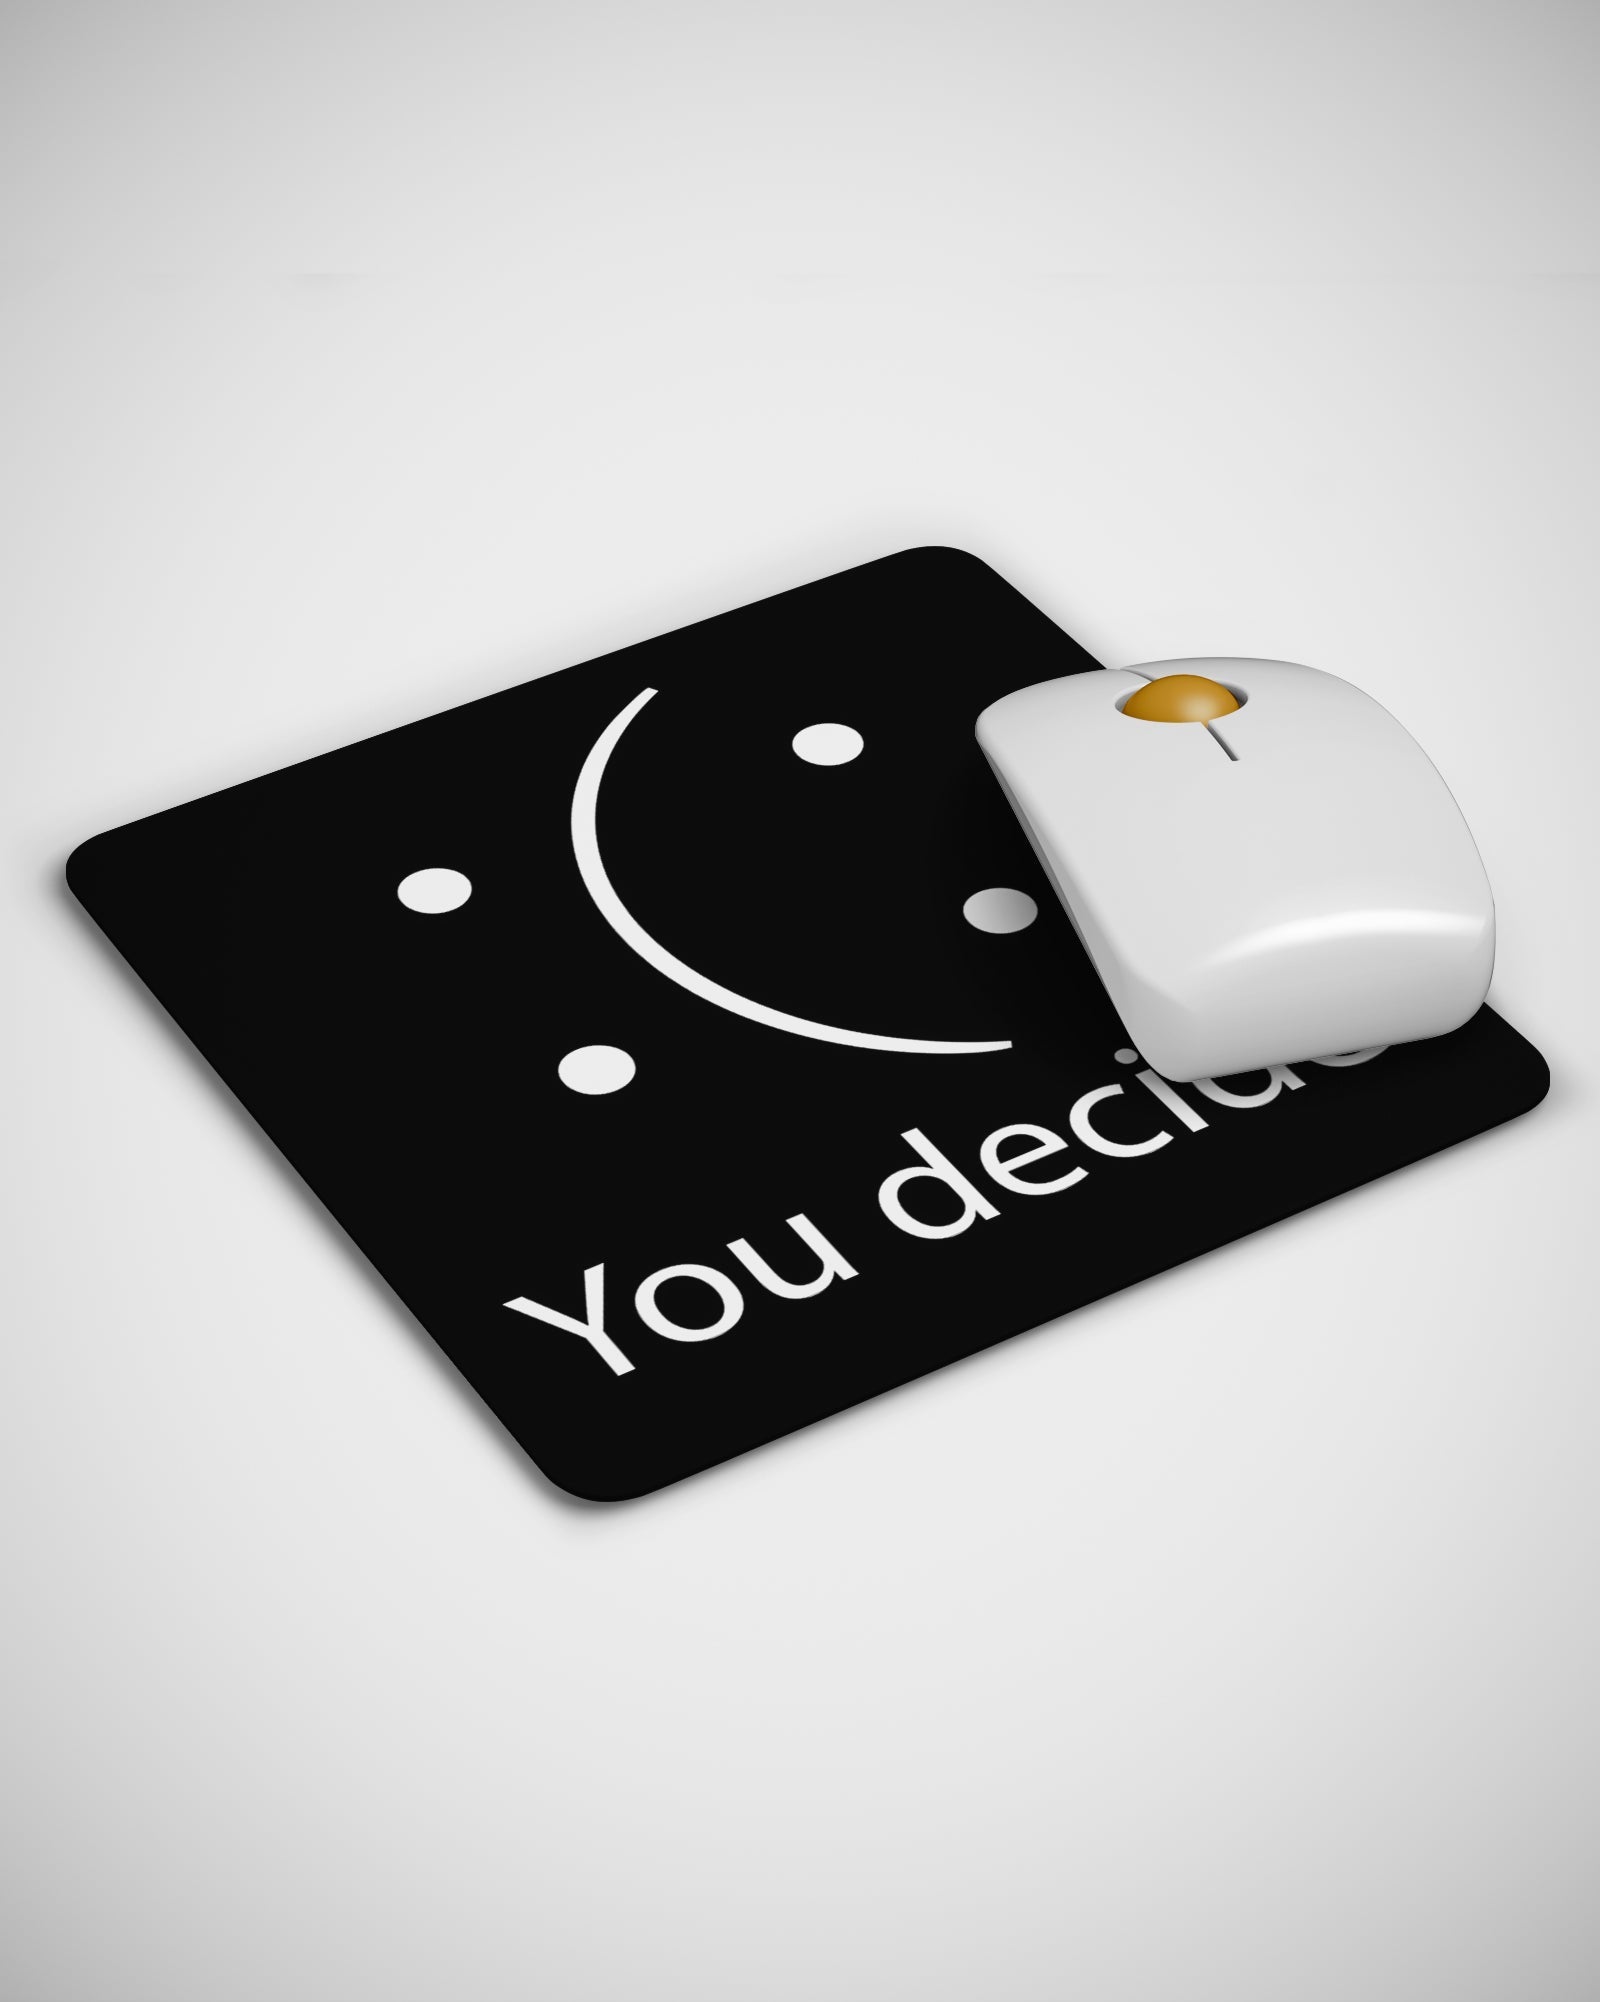 You Decide Mouse pad